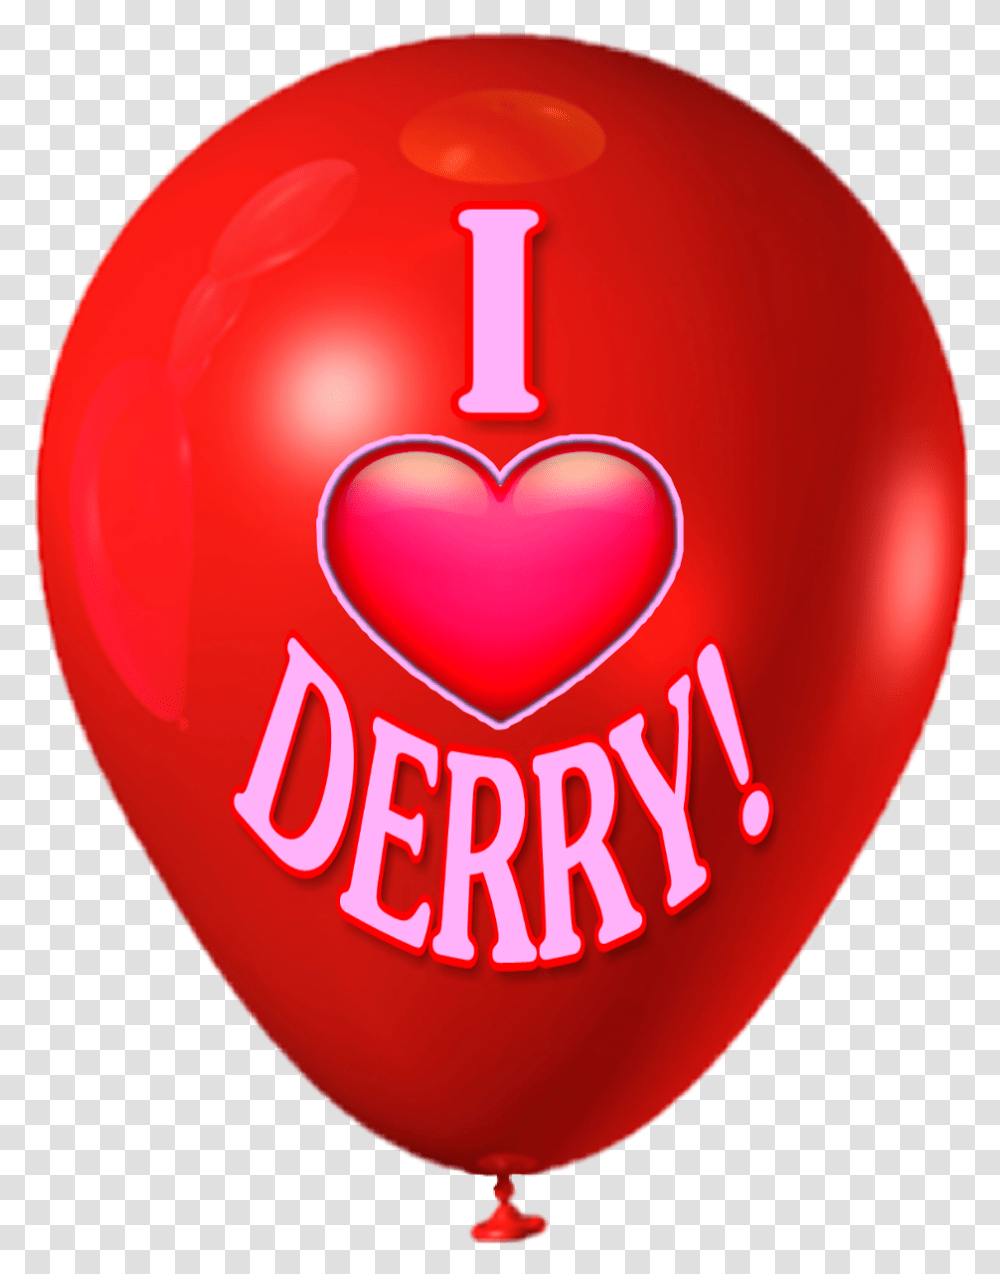 Pennywise It Pennywisetheclown Balloon Redballoon, Heart, Logo Transparent Png